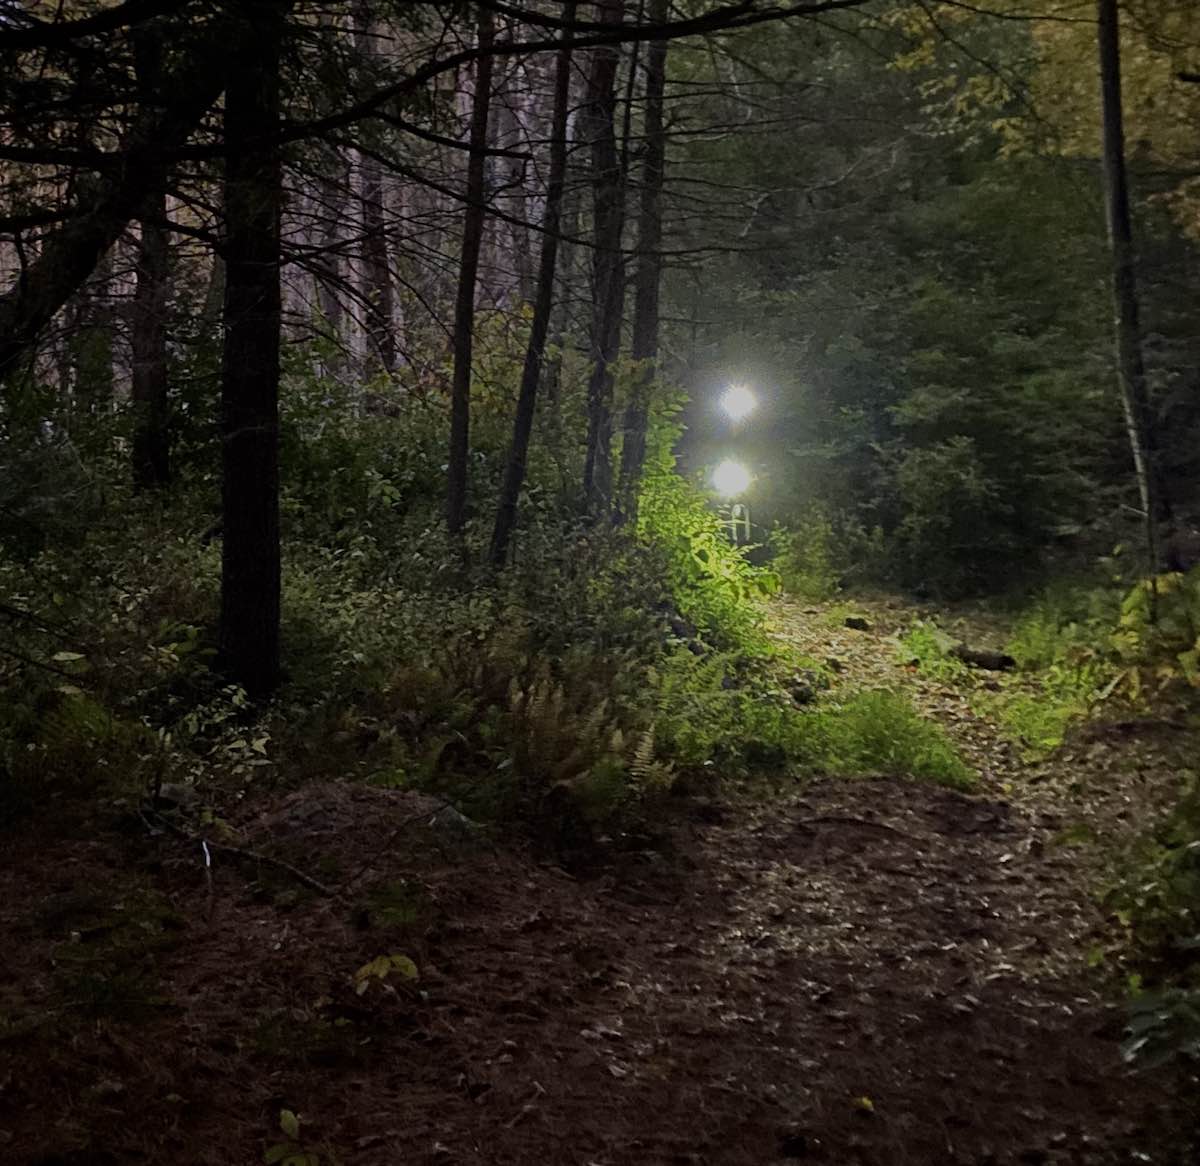 bikerumor pic of the day Boxford State Forest, Massachusetts, U.S.A. two bright spots are seen in the middle of the photo that light up a grass lined mountain bike trail with pine trees and the outline of dark tree trunks on either side.